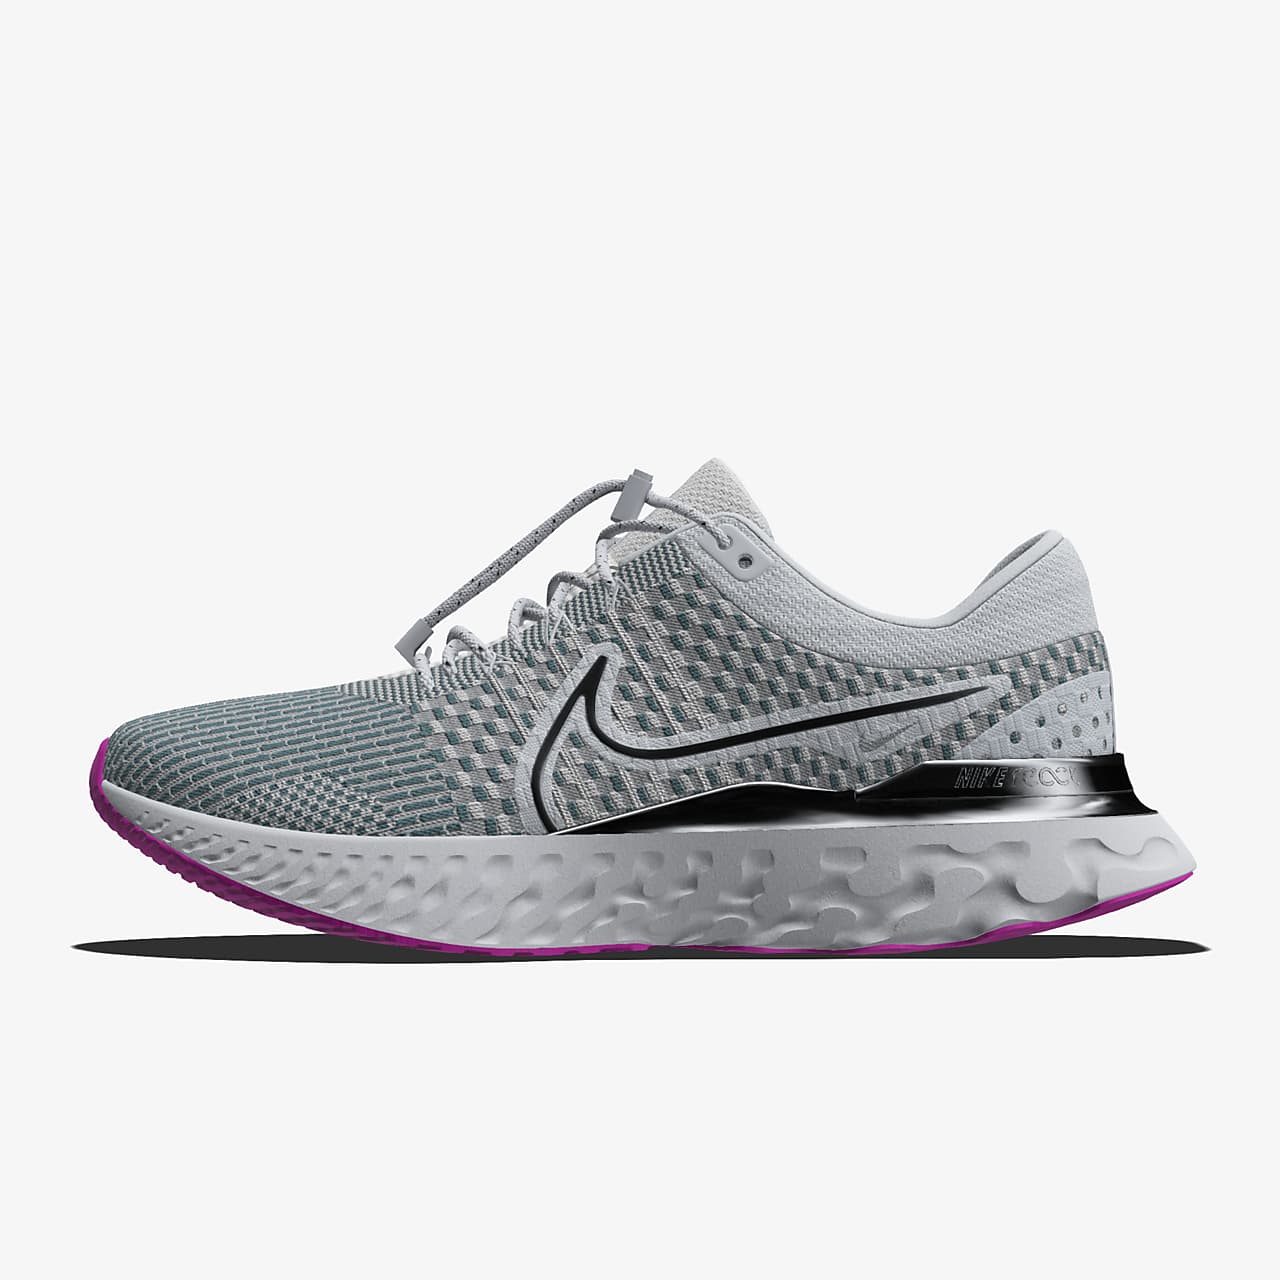 Chaussure de running sur route personnalisable Nike React Infinity 3 By You pour femme